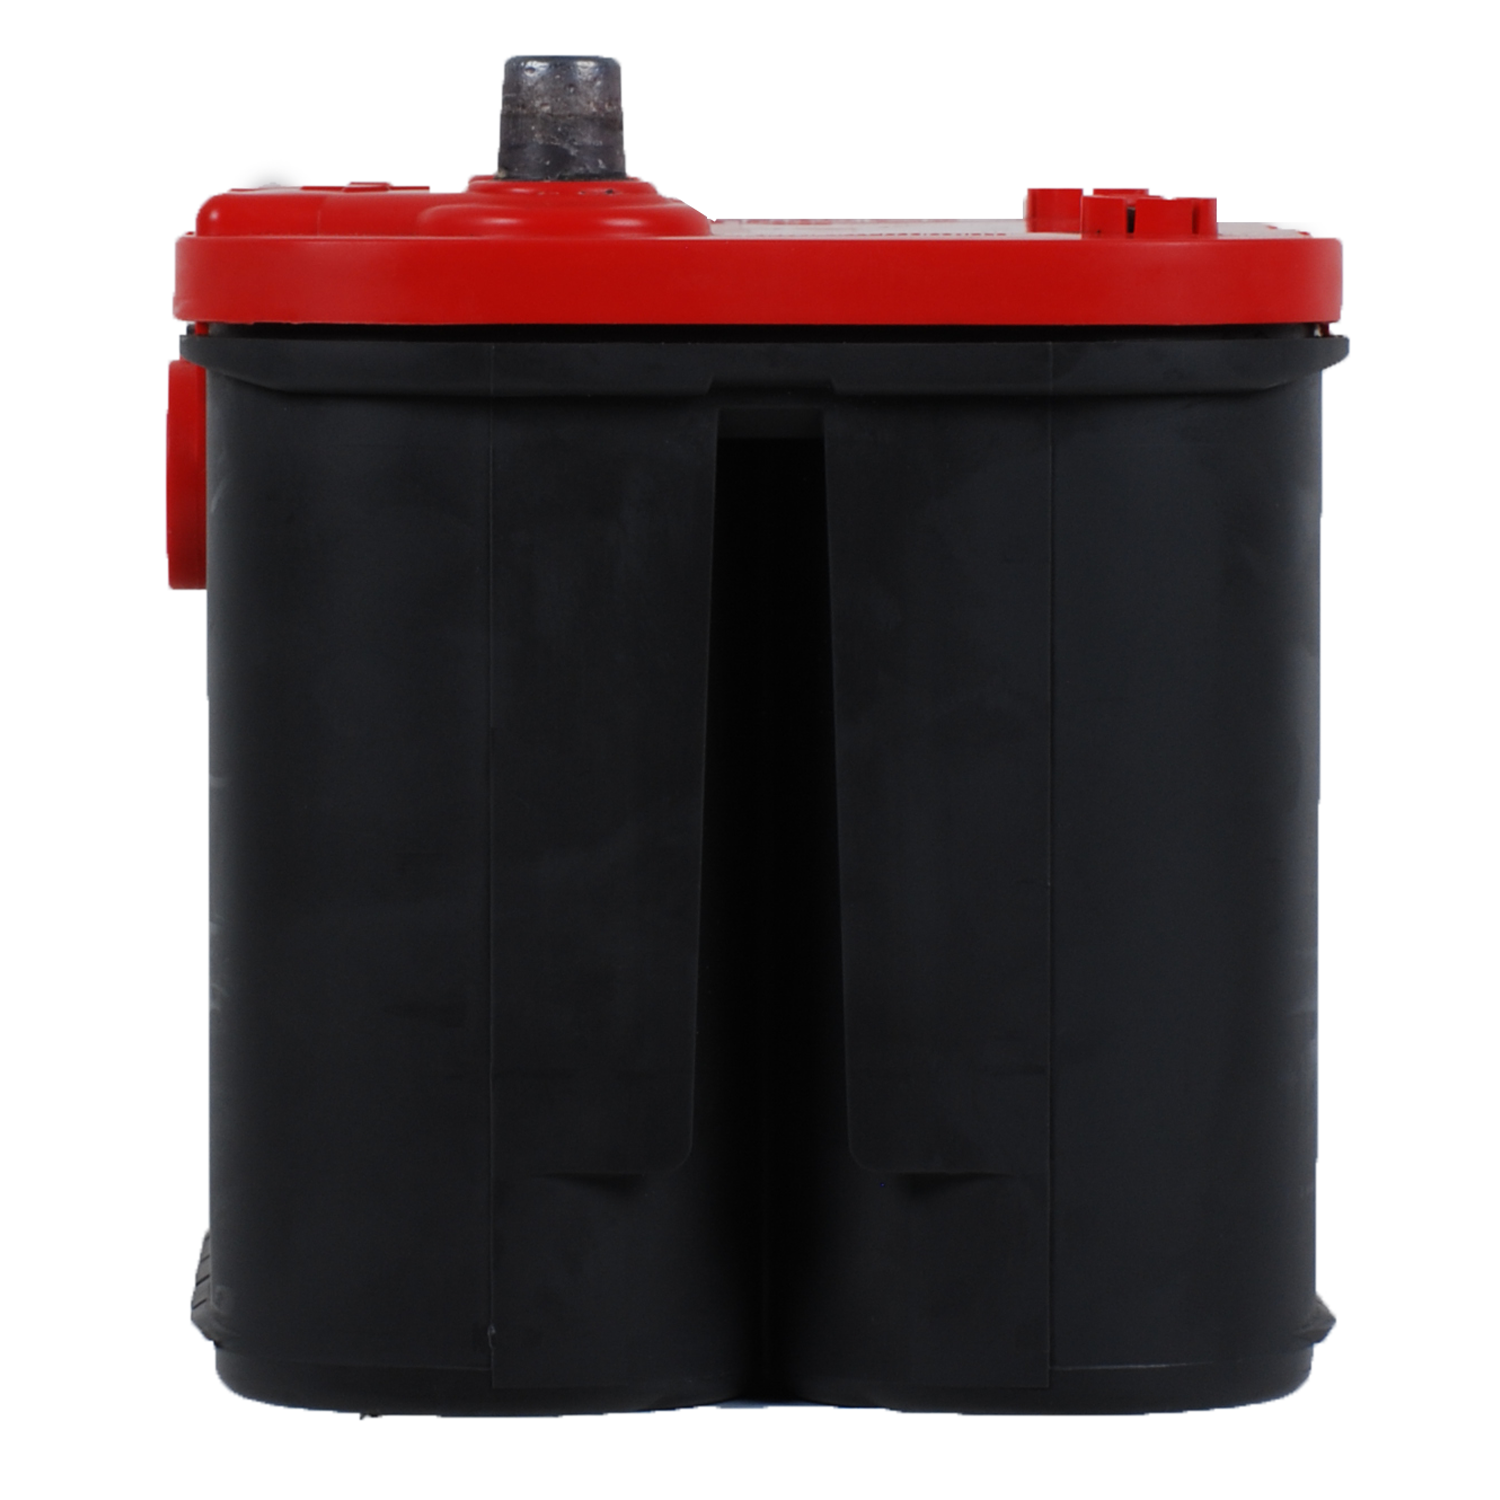 OPTIMA RedTop AGM Spiralcell Automotive Starting Battery, Group Size 34/78, 12 Volt 800 CCA - image 6 of 7